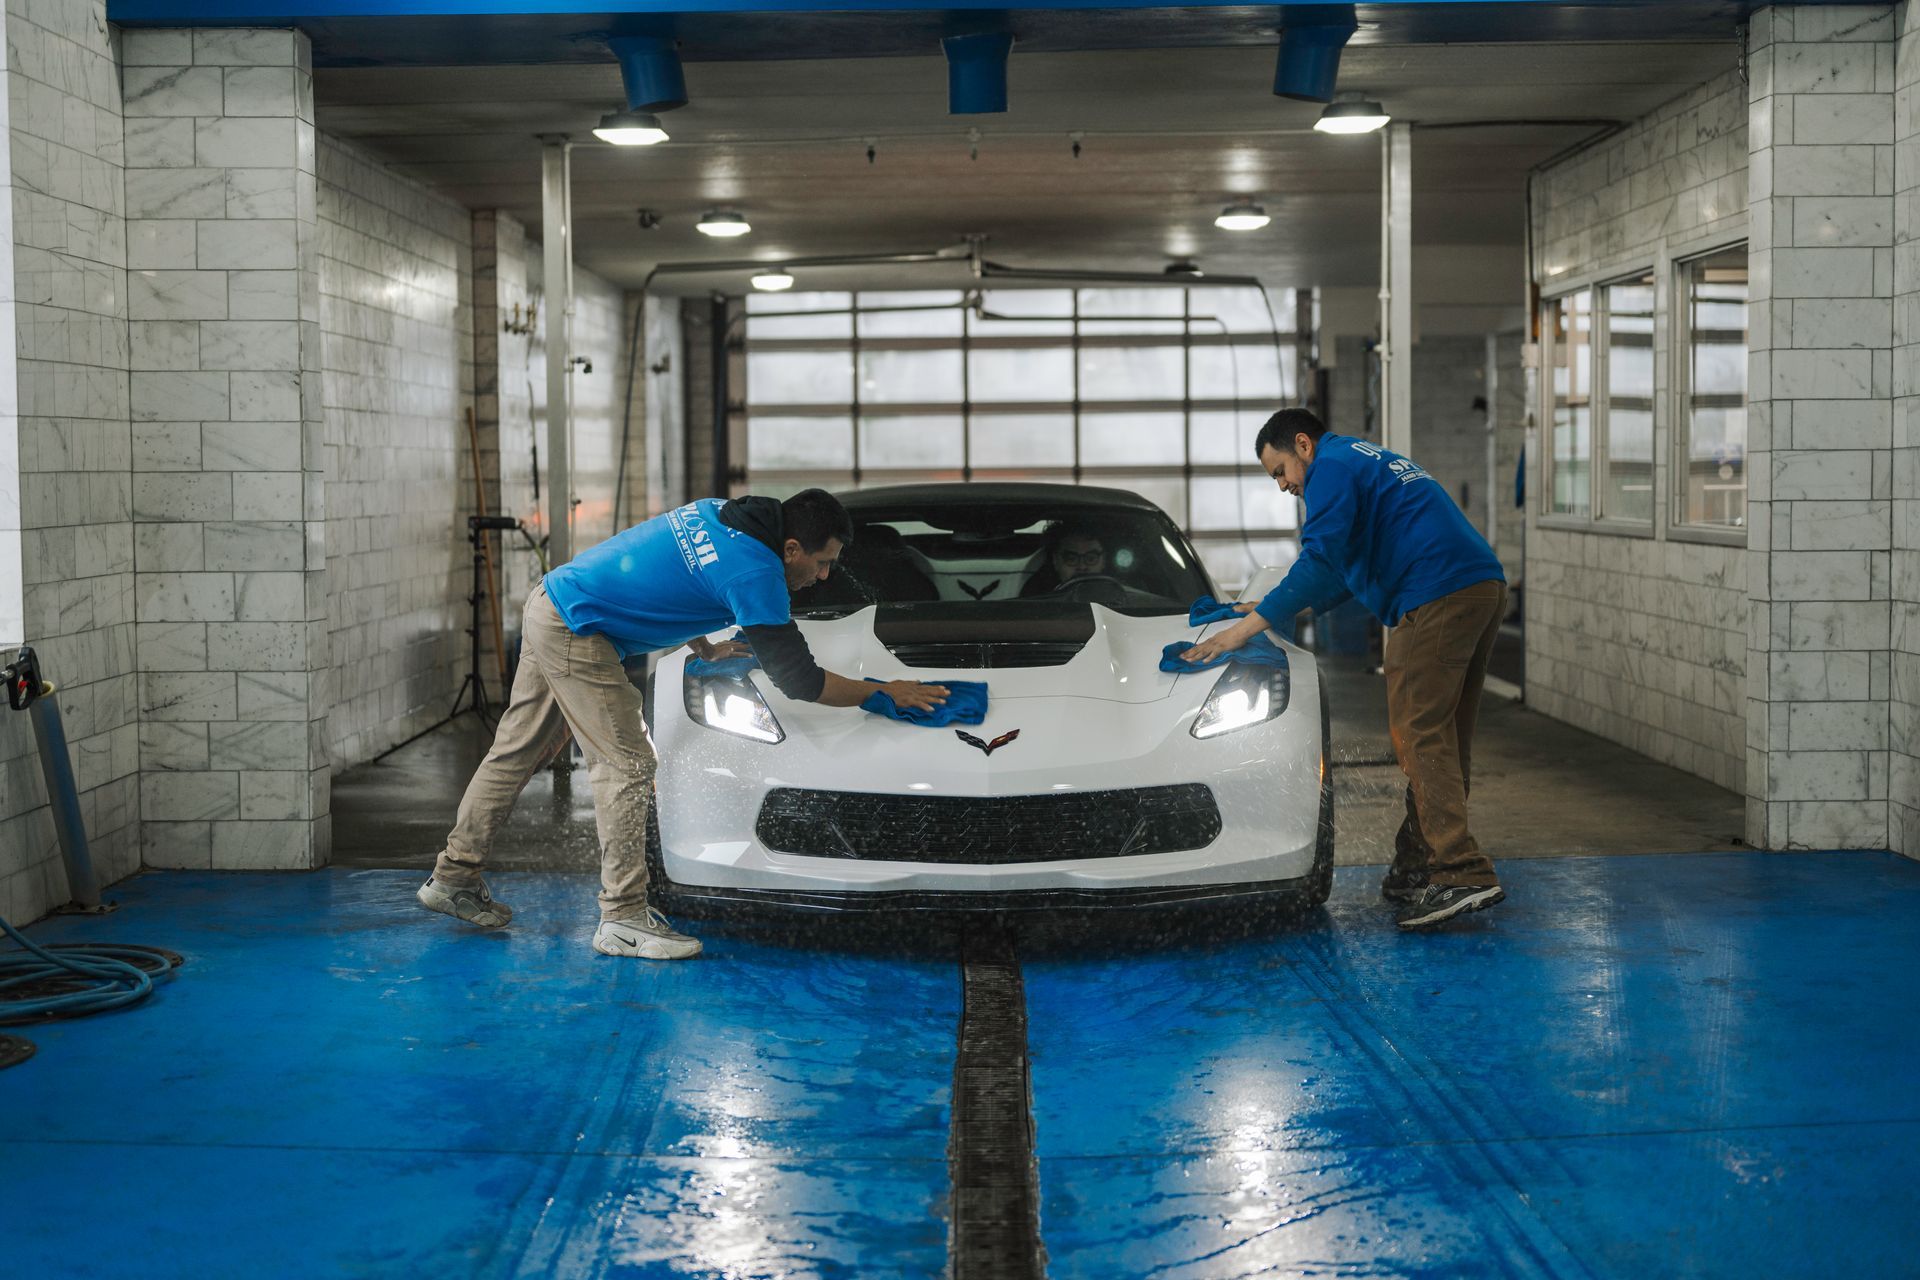 Two men are washing a white sports car in a car wash.